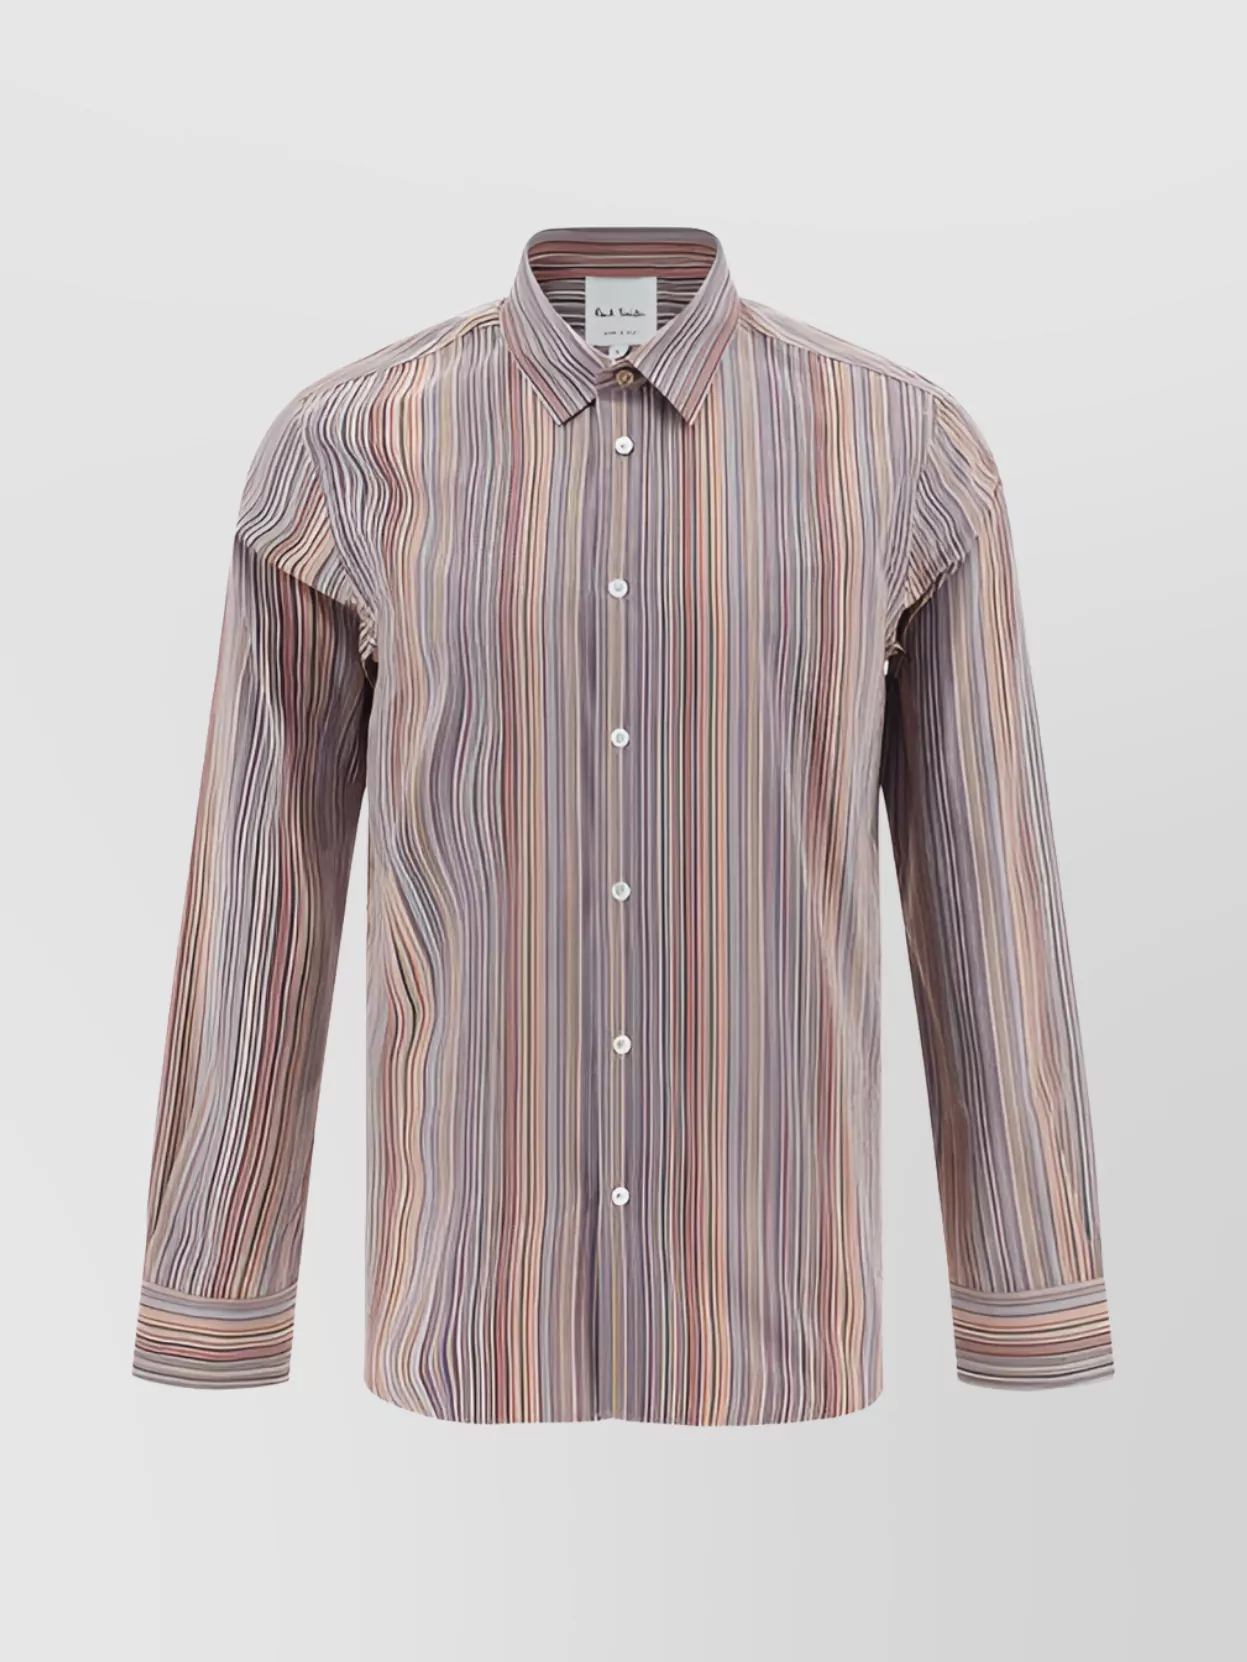 Paul Smith Striped Shirt Cuffed Sleeves In Multi